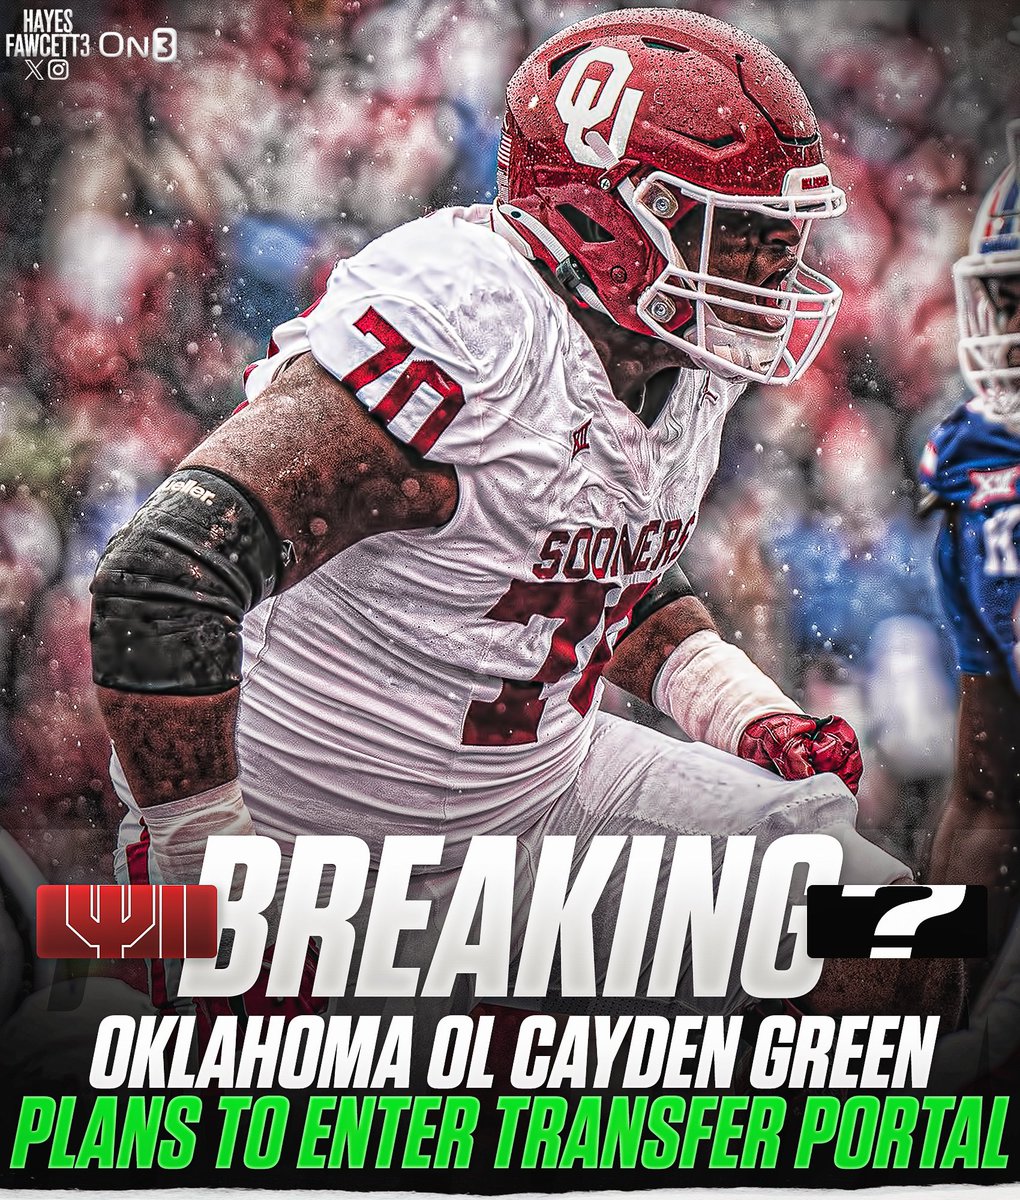 BREAKING: Oklahoma OL Cayden Green plans to enter the Transfer Portal, he tells @on3sports The 6’5 325 OL started 7 games as a True Freshman for the Sooners this year Ranked as a Top 95 Recruit in the ‘23 Class (per On3 Industry) on3.com/college/oklaho…